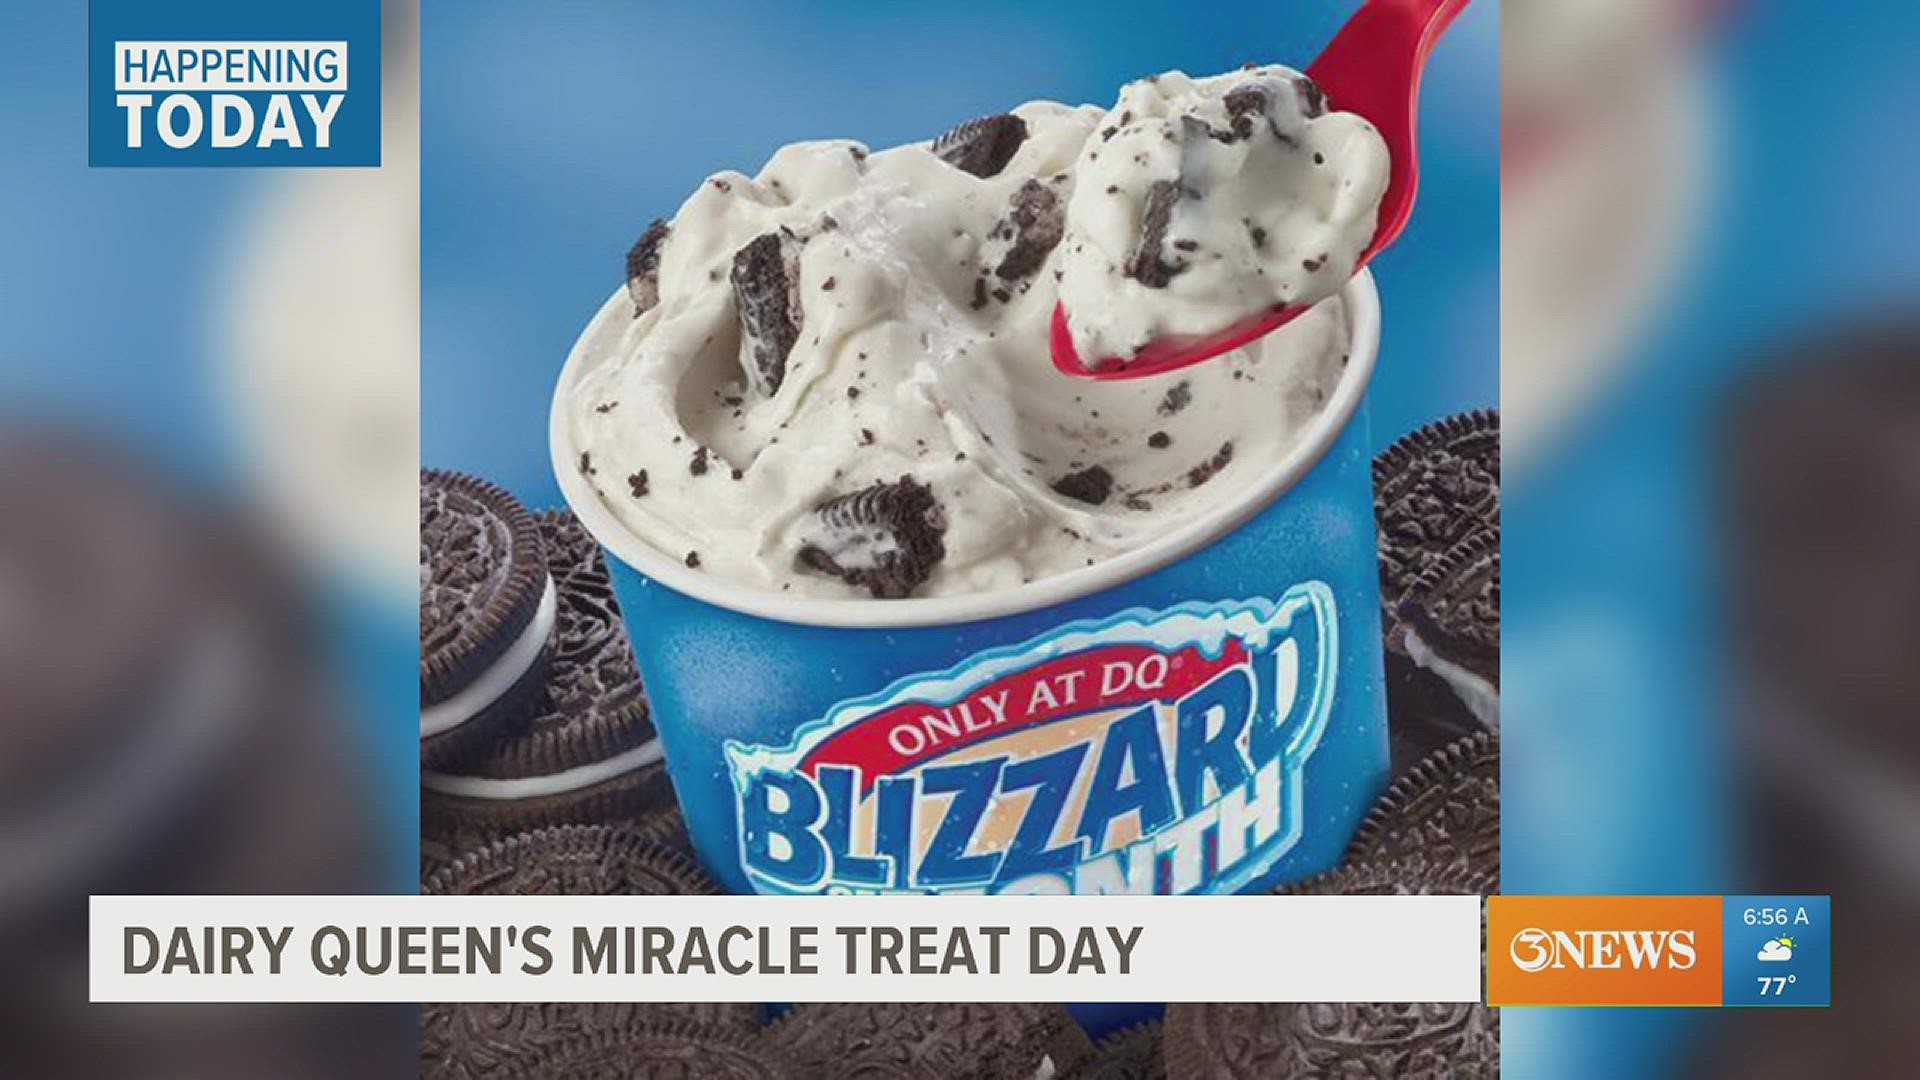 Every dollar from a Blizzard purchase at Dairy Queen will be donated to hospitals that are part of the "Children's miracle network".